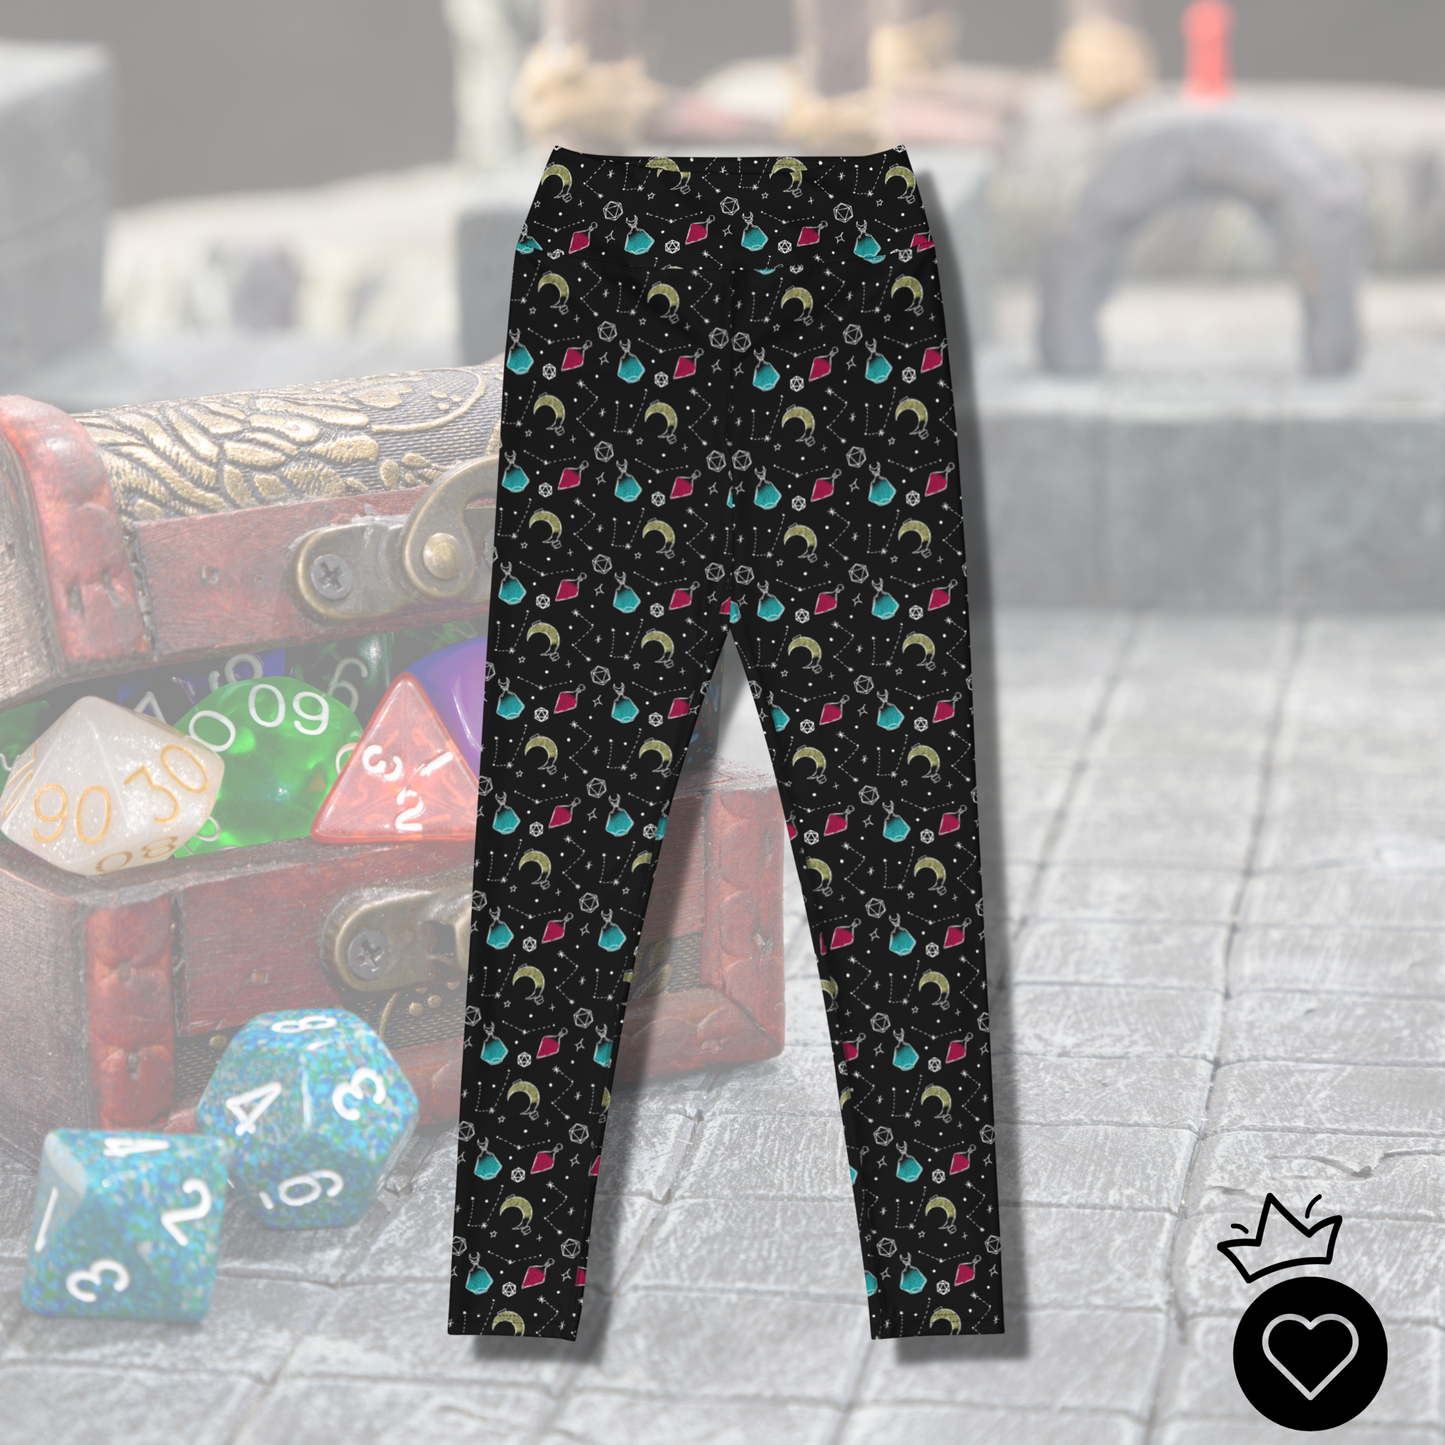 Potions and Dice Leggings